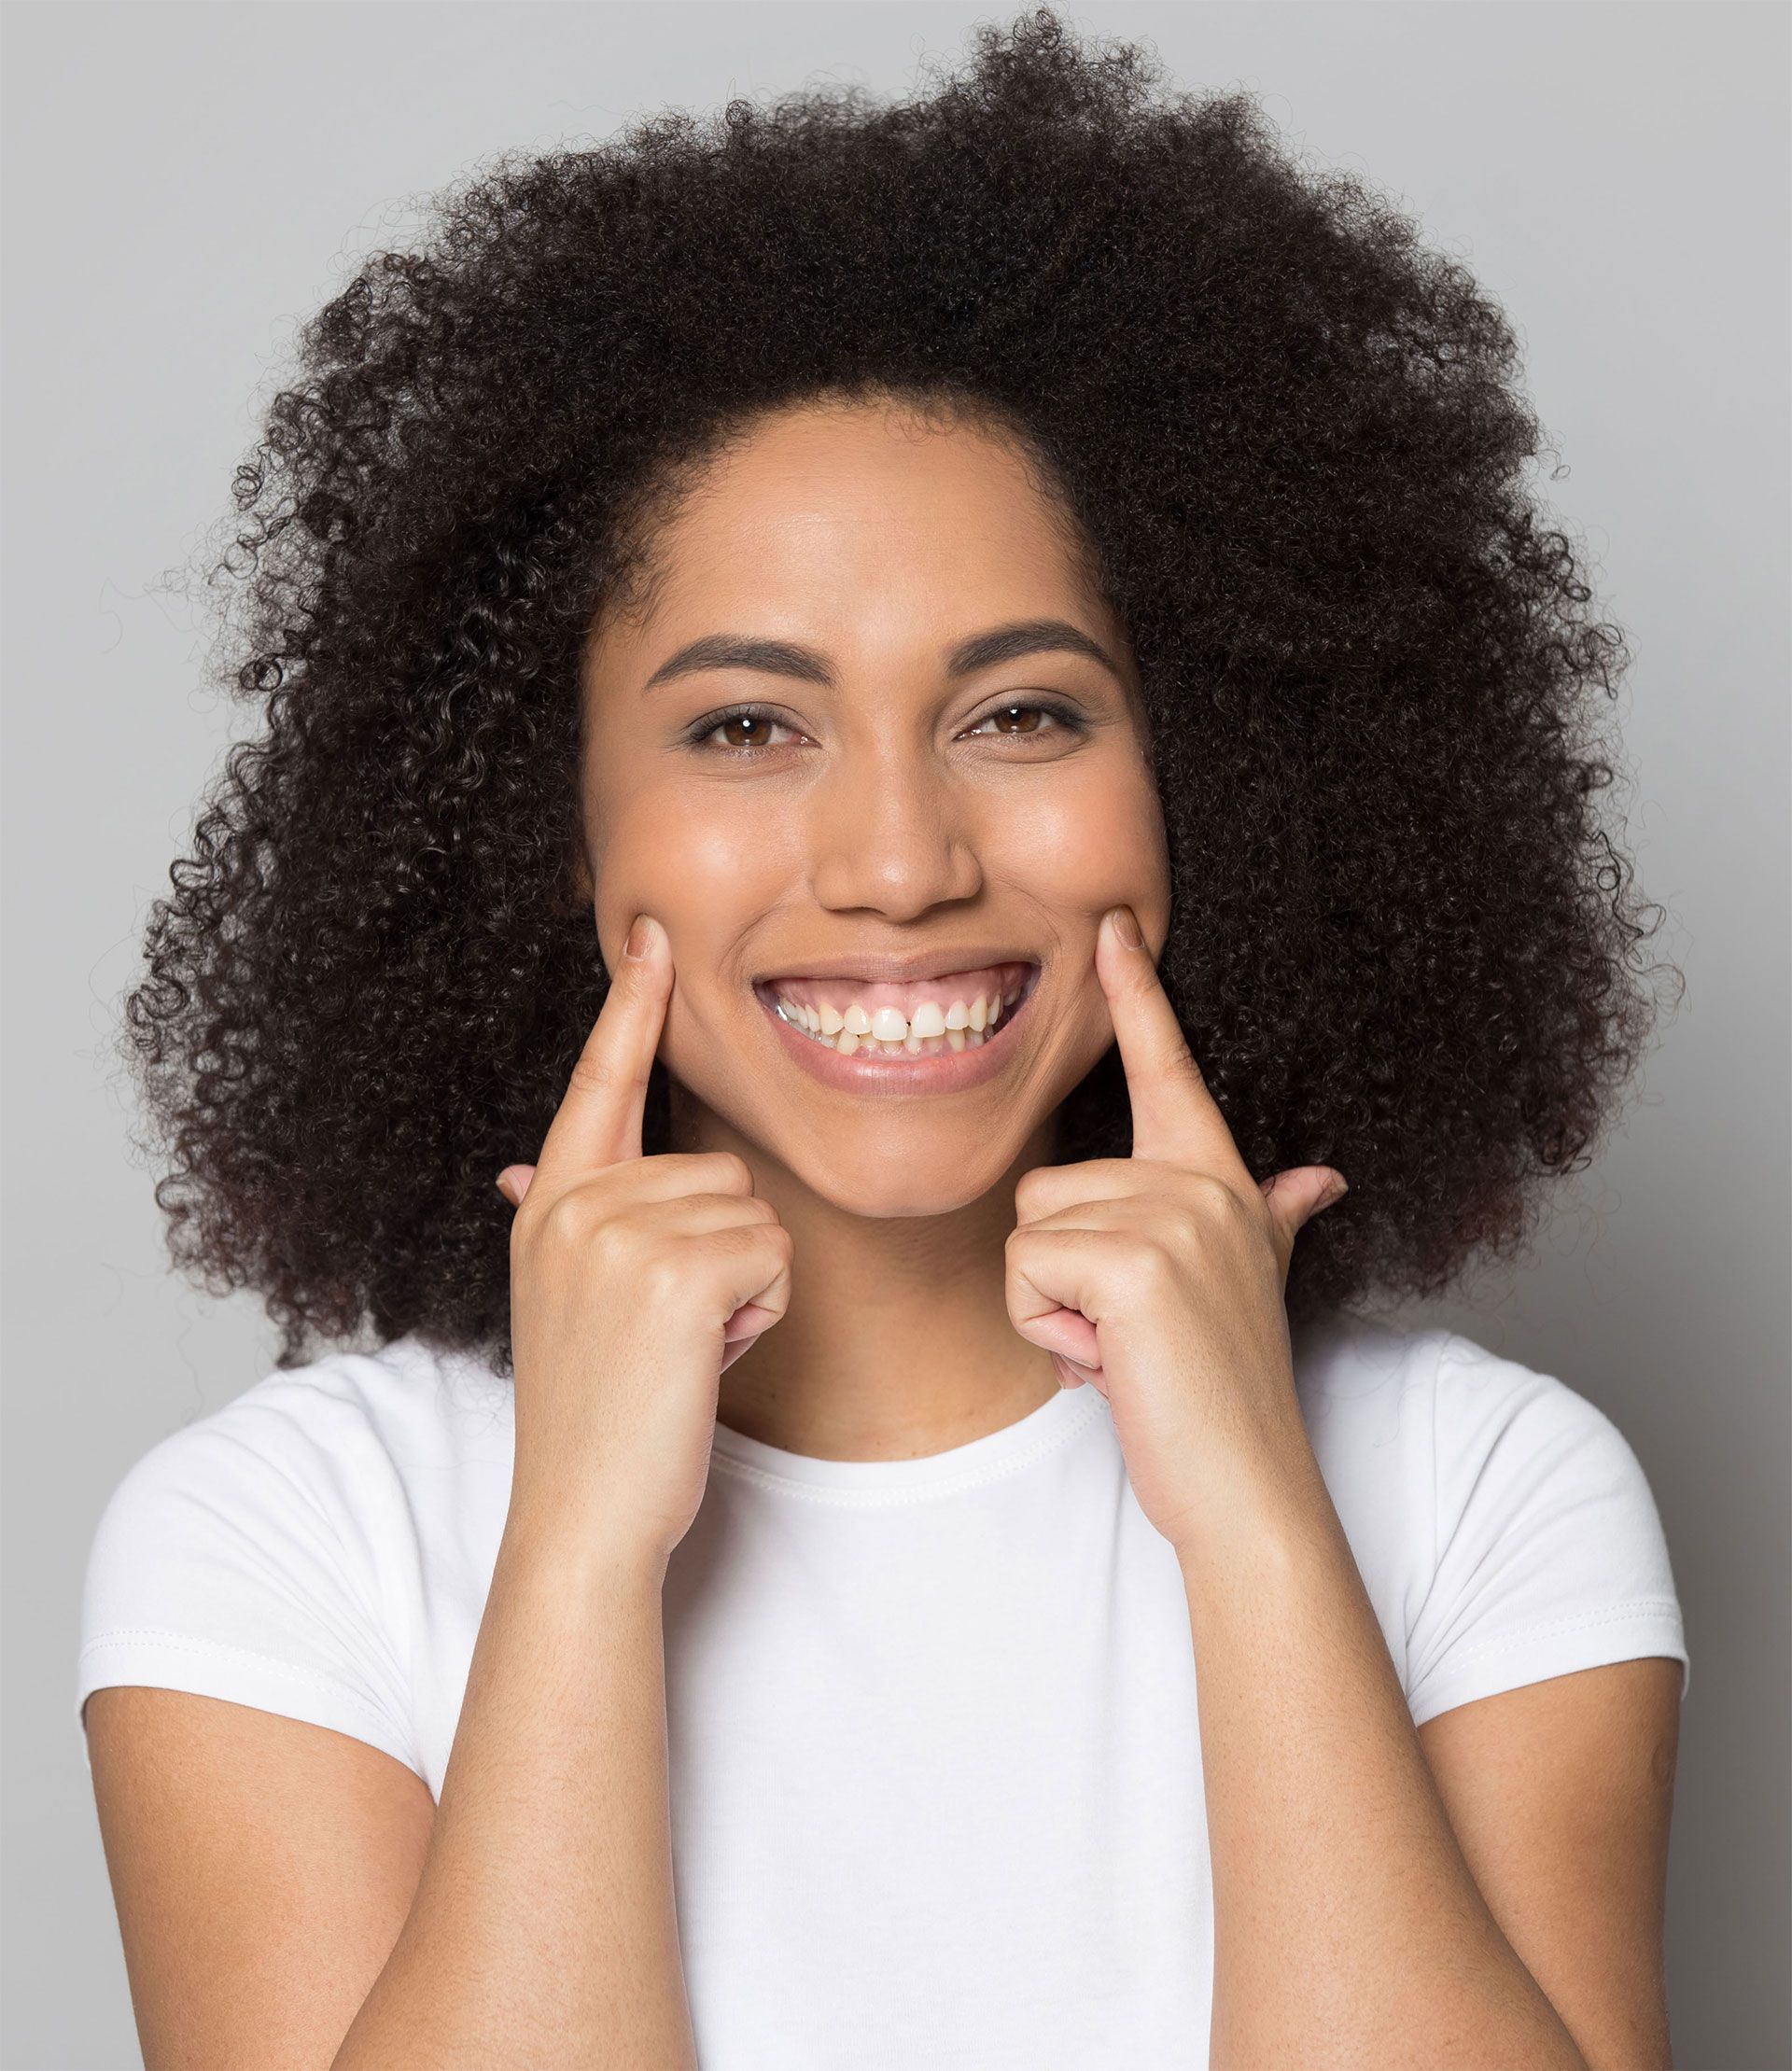 A woman with curly hair is smiling and touching her face with her fingers